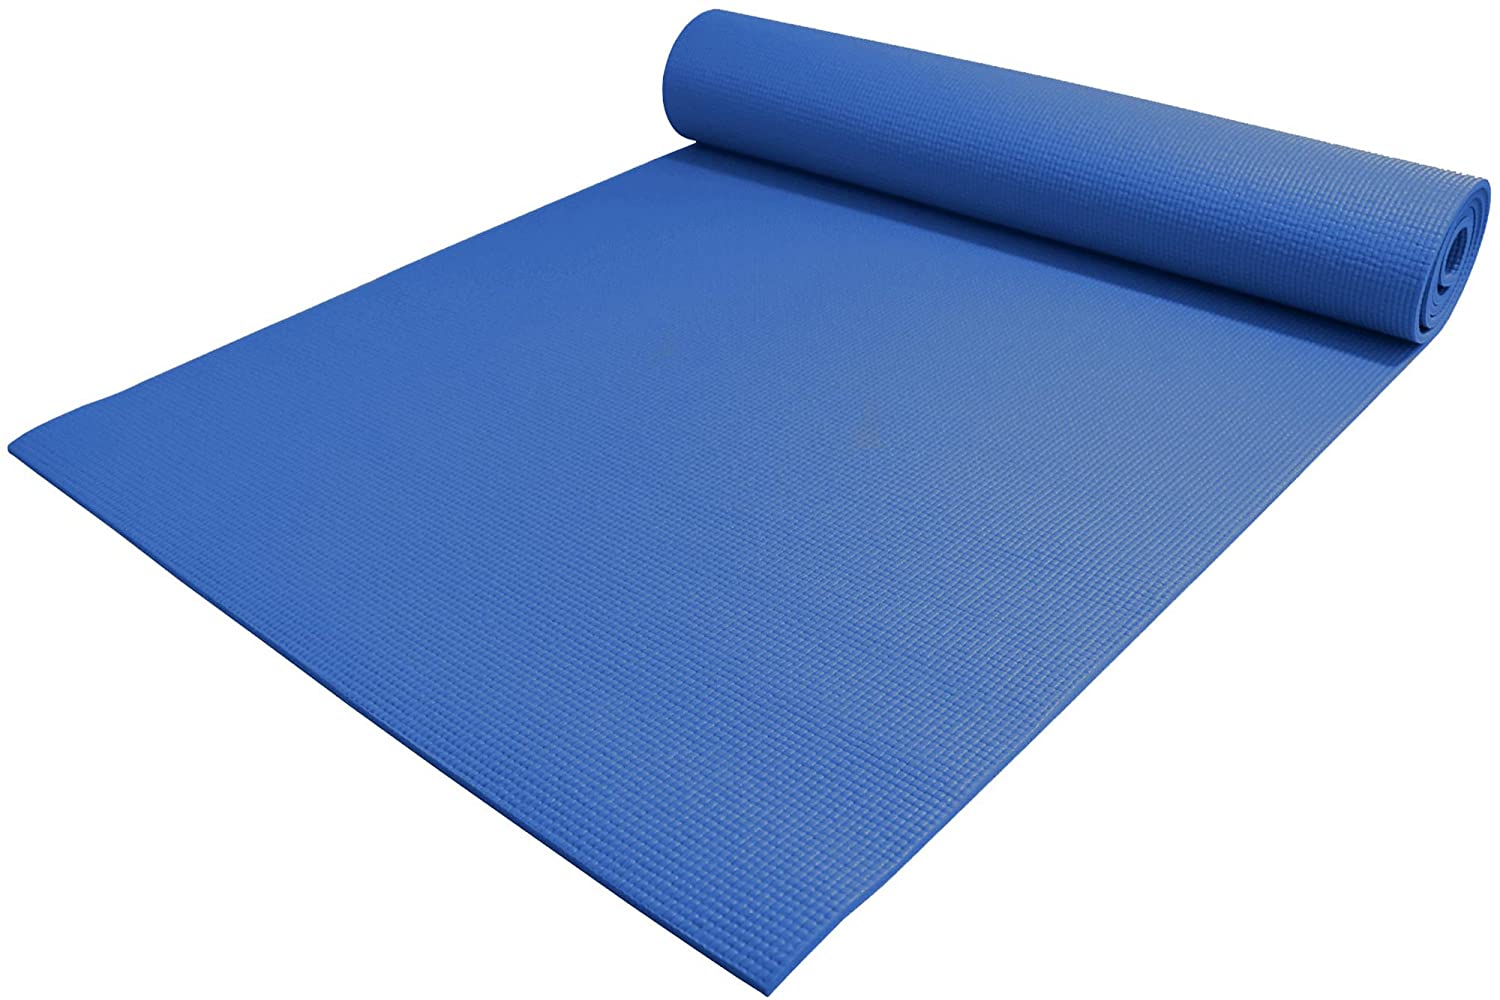 The The 10 Best Hot Yoga Mats to Buy in 2024 - To Enhance Your Practice